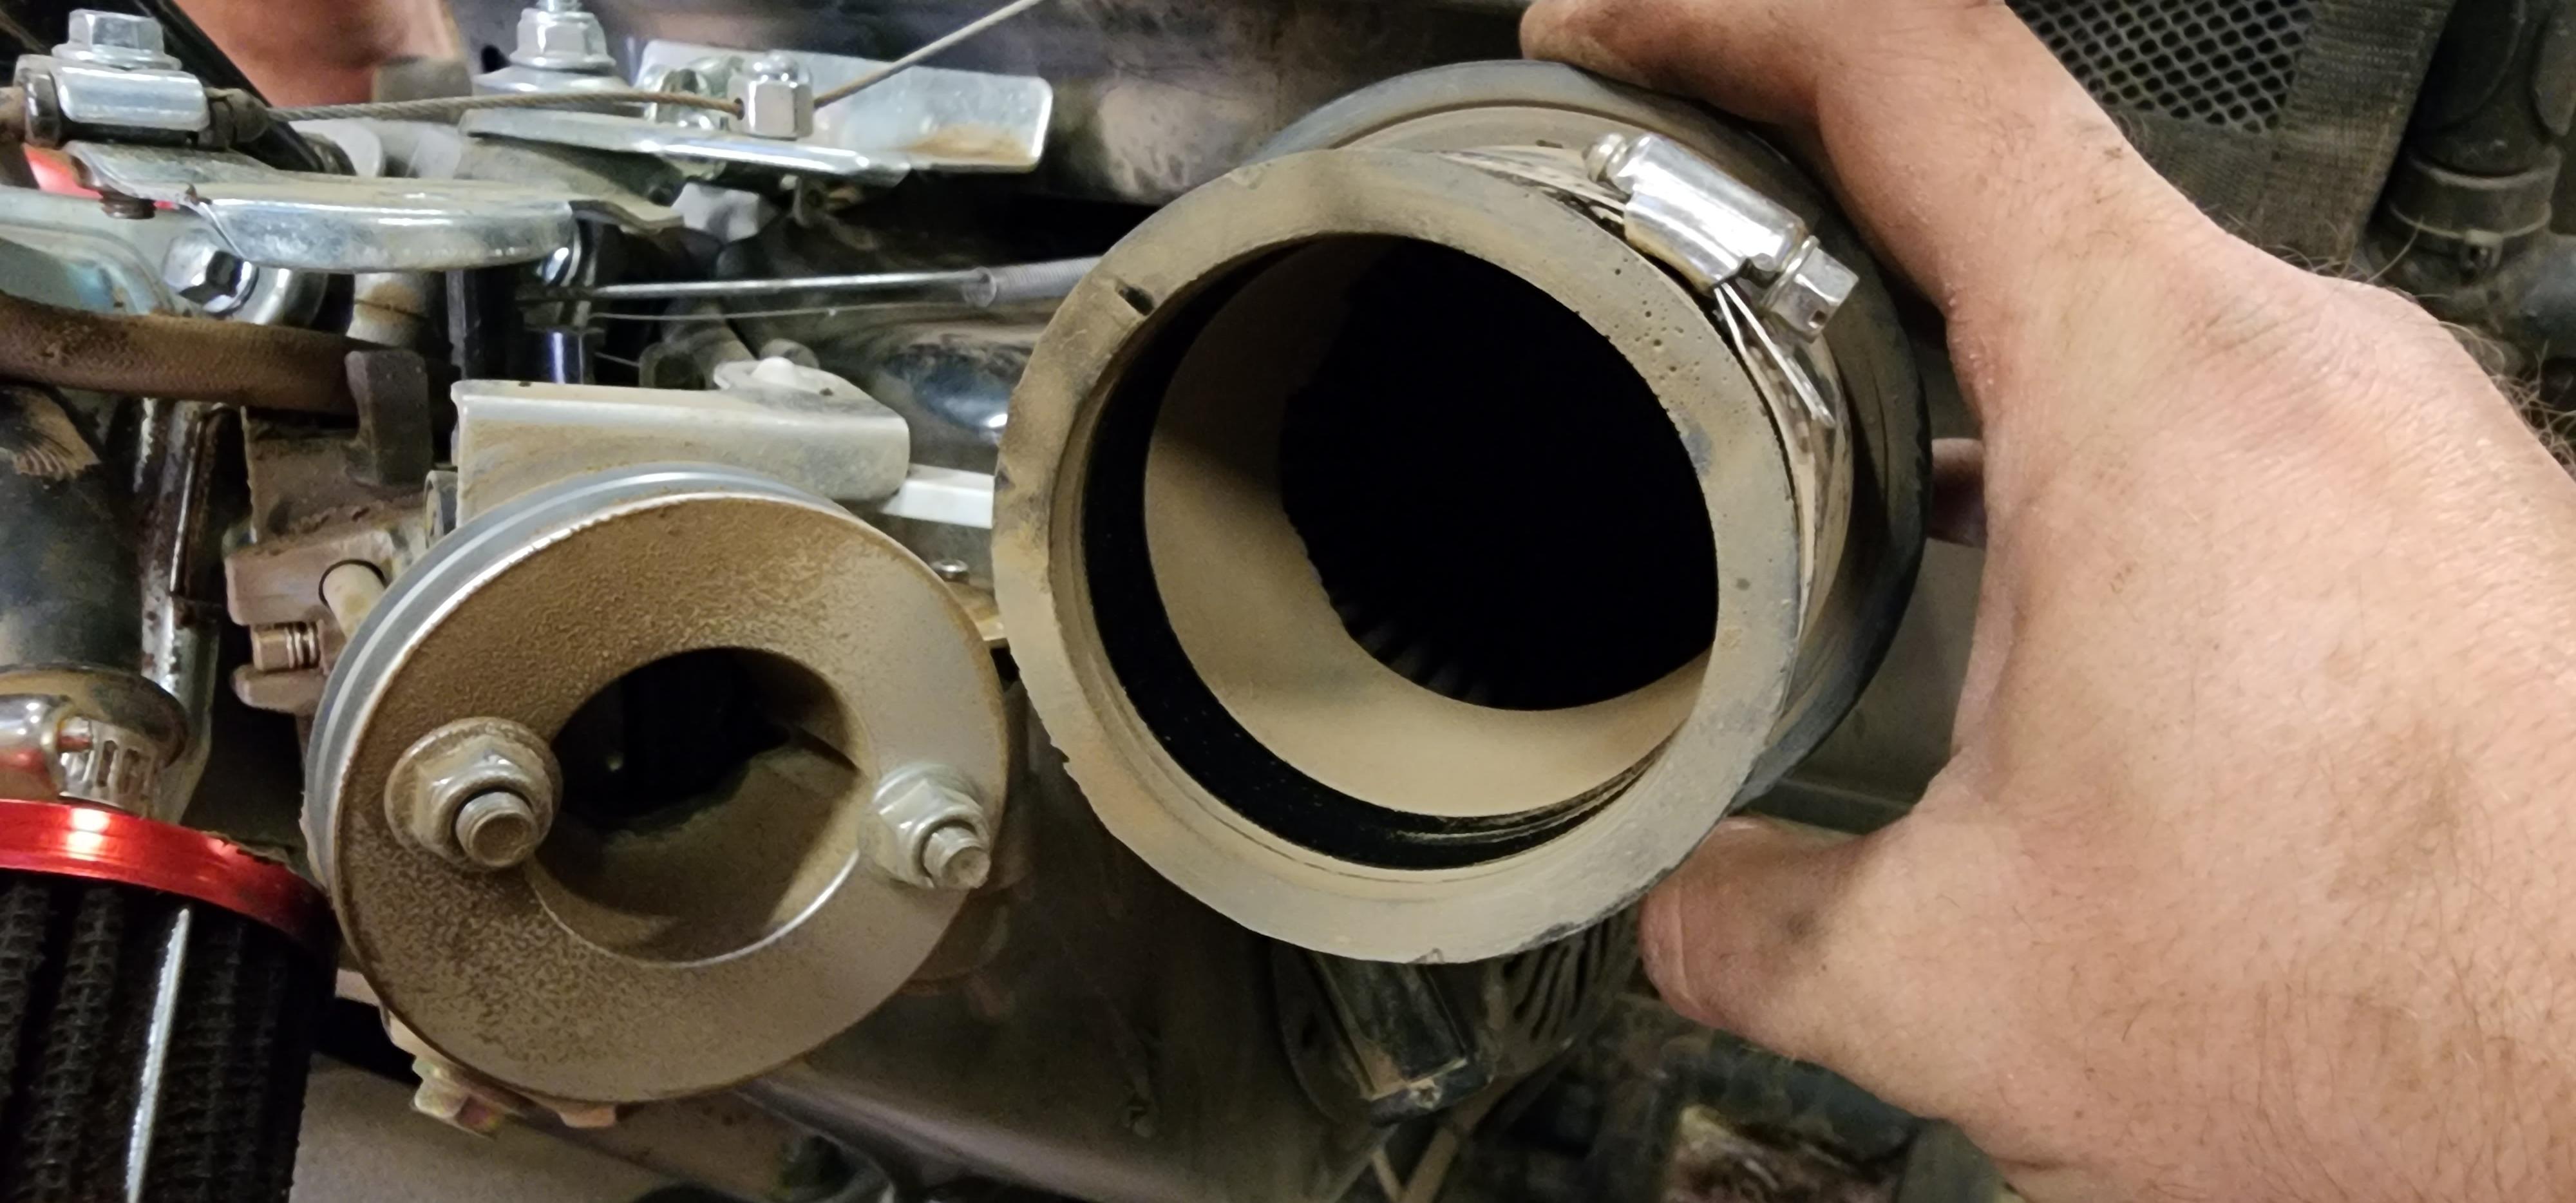 Air filter and vortex stack with dust inhalation